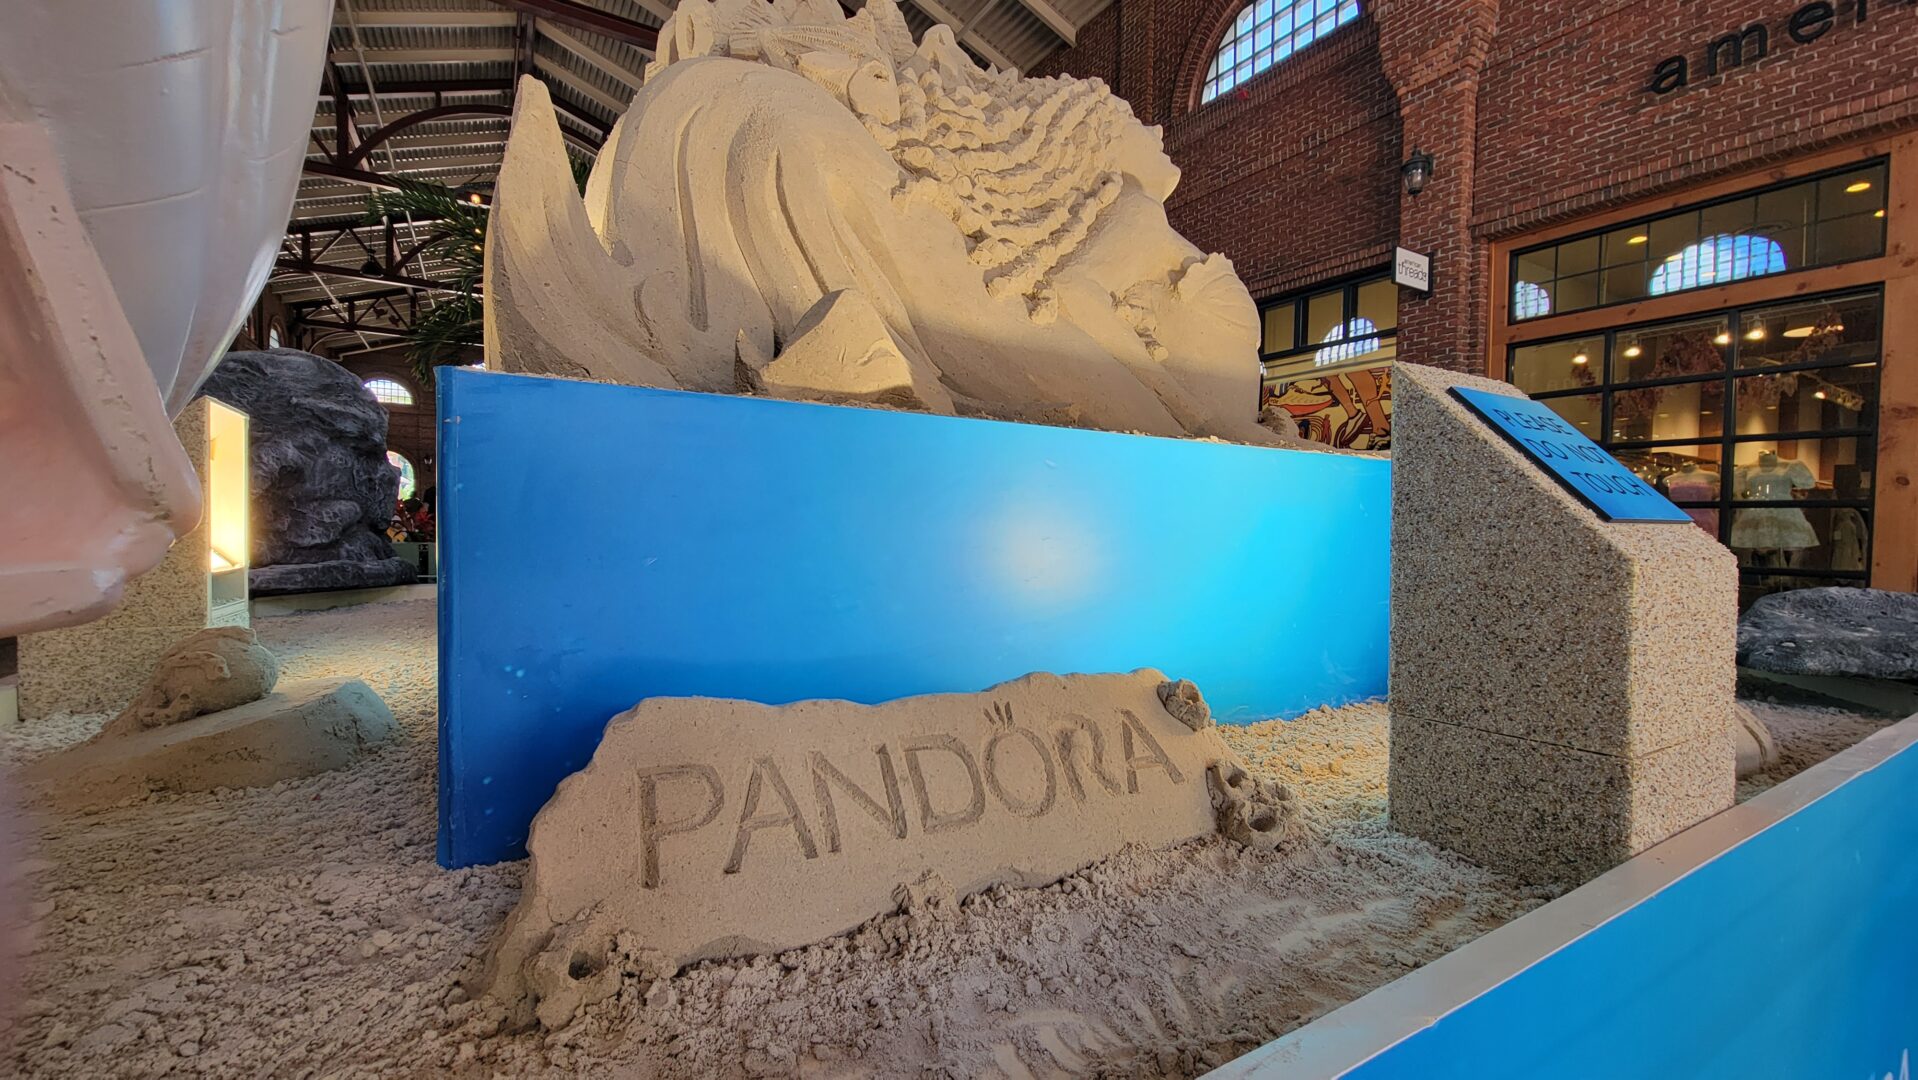 New Live-Action The Little Mermaid Sand Sculpture in Disney Springs